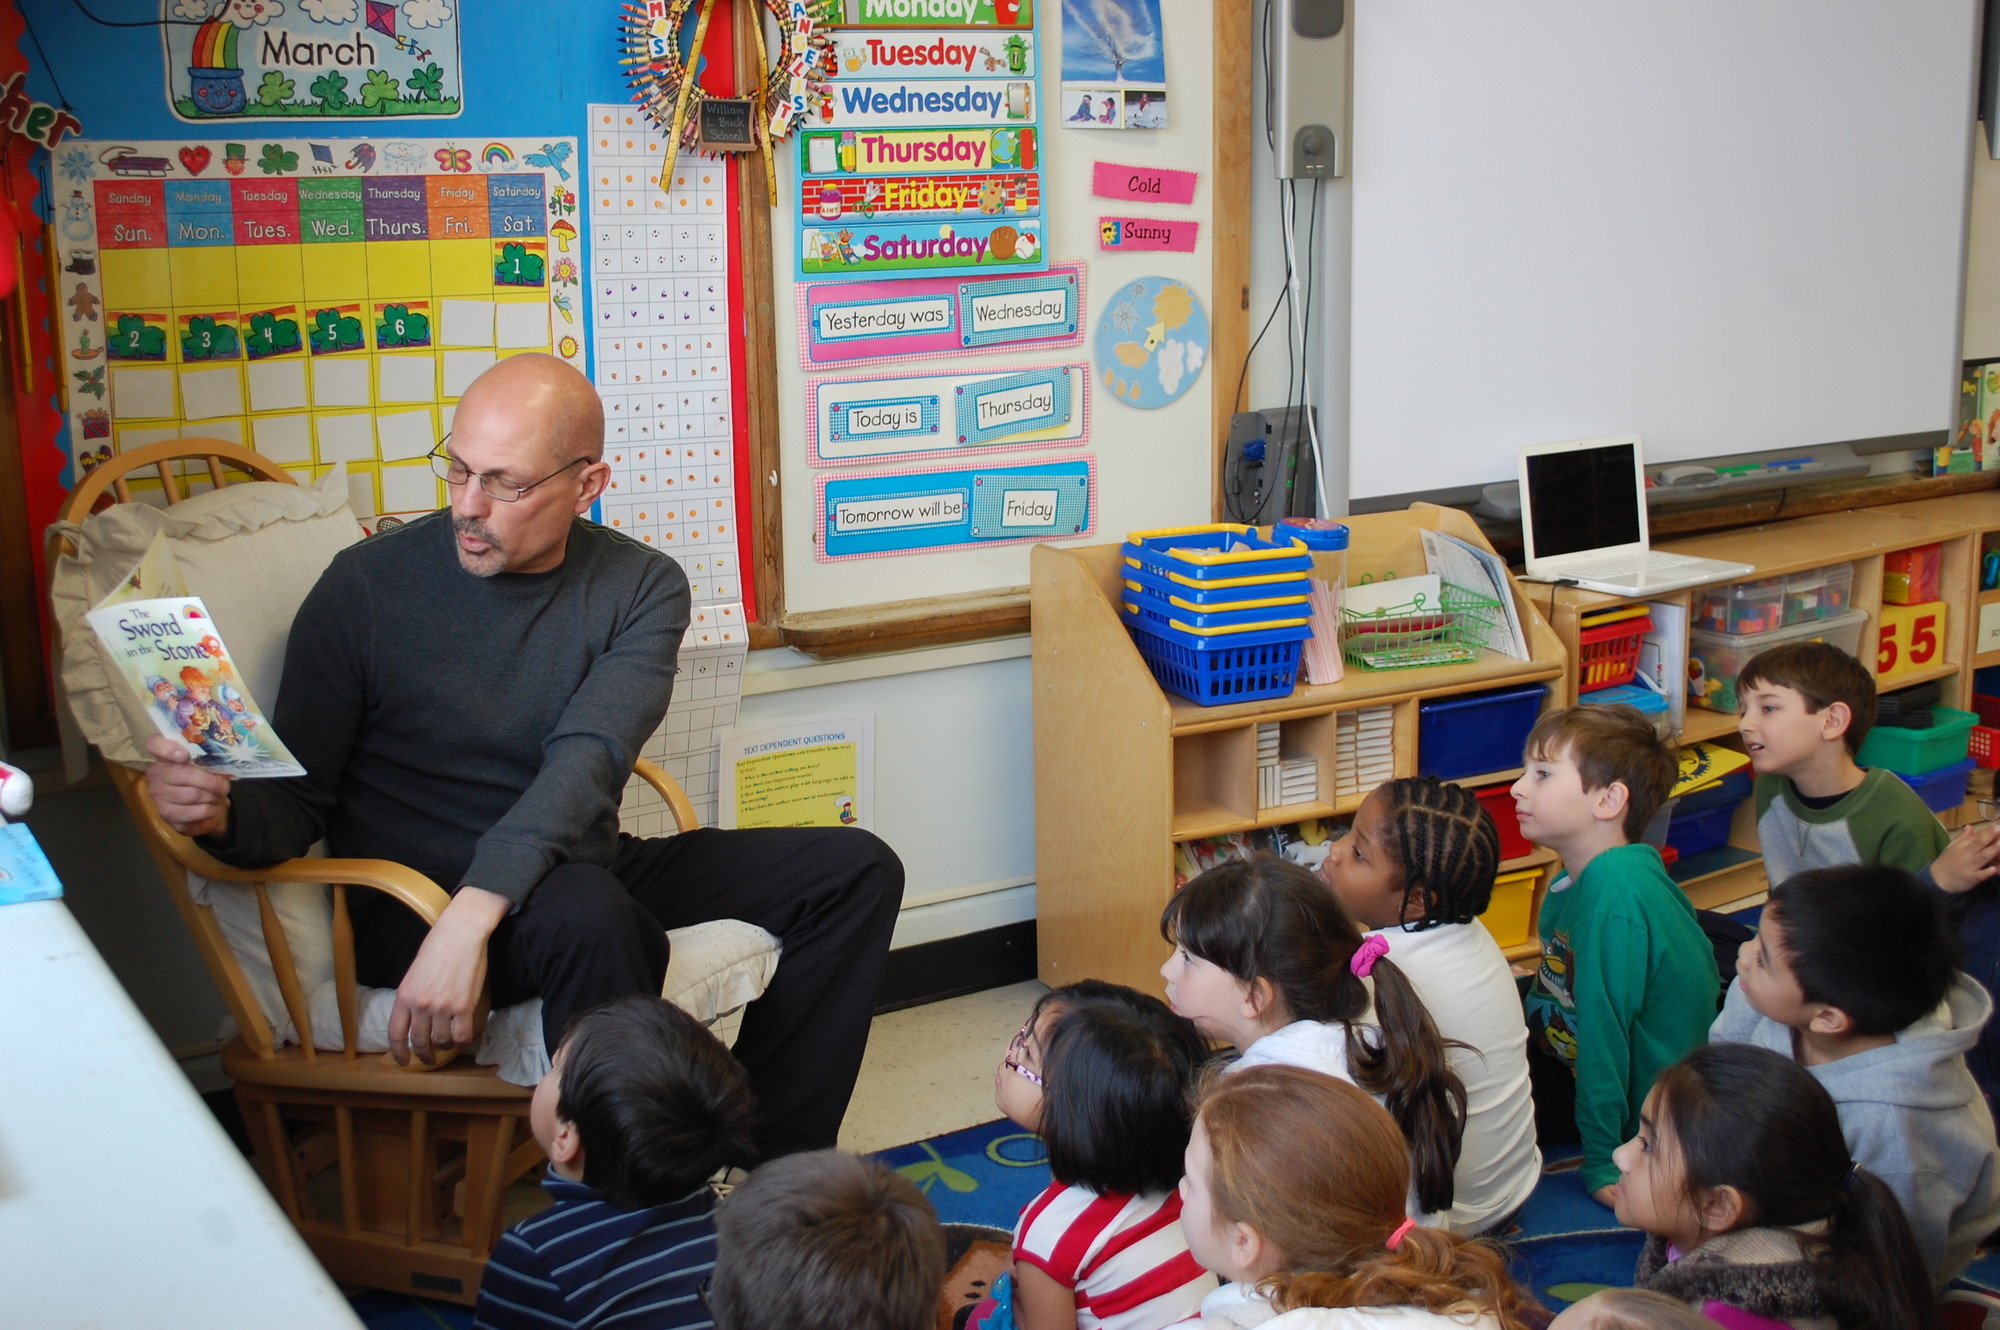 Phys. ed. teacher Joseph Mangini got in on the action, reading to a first-grade class.